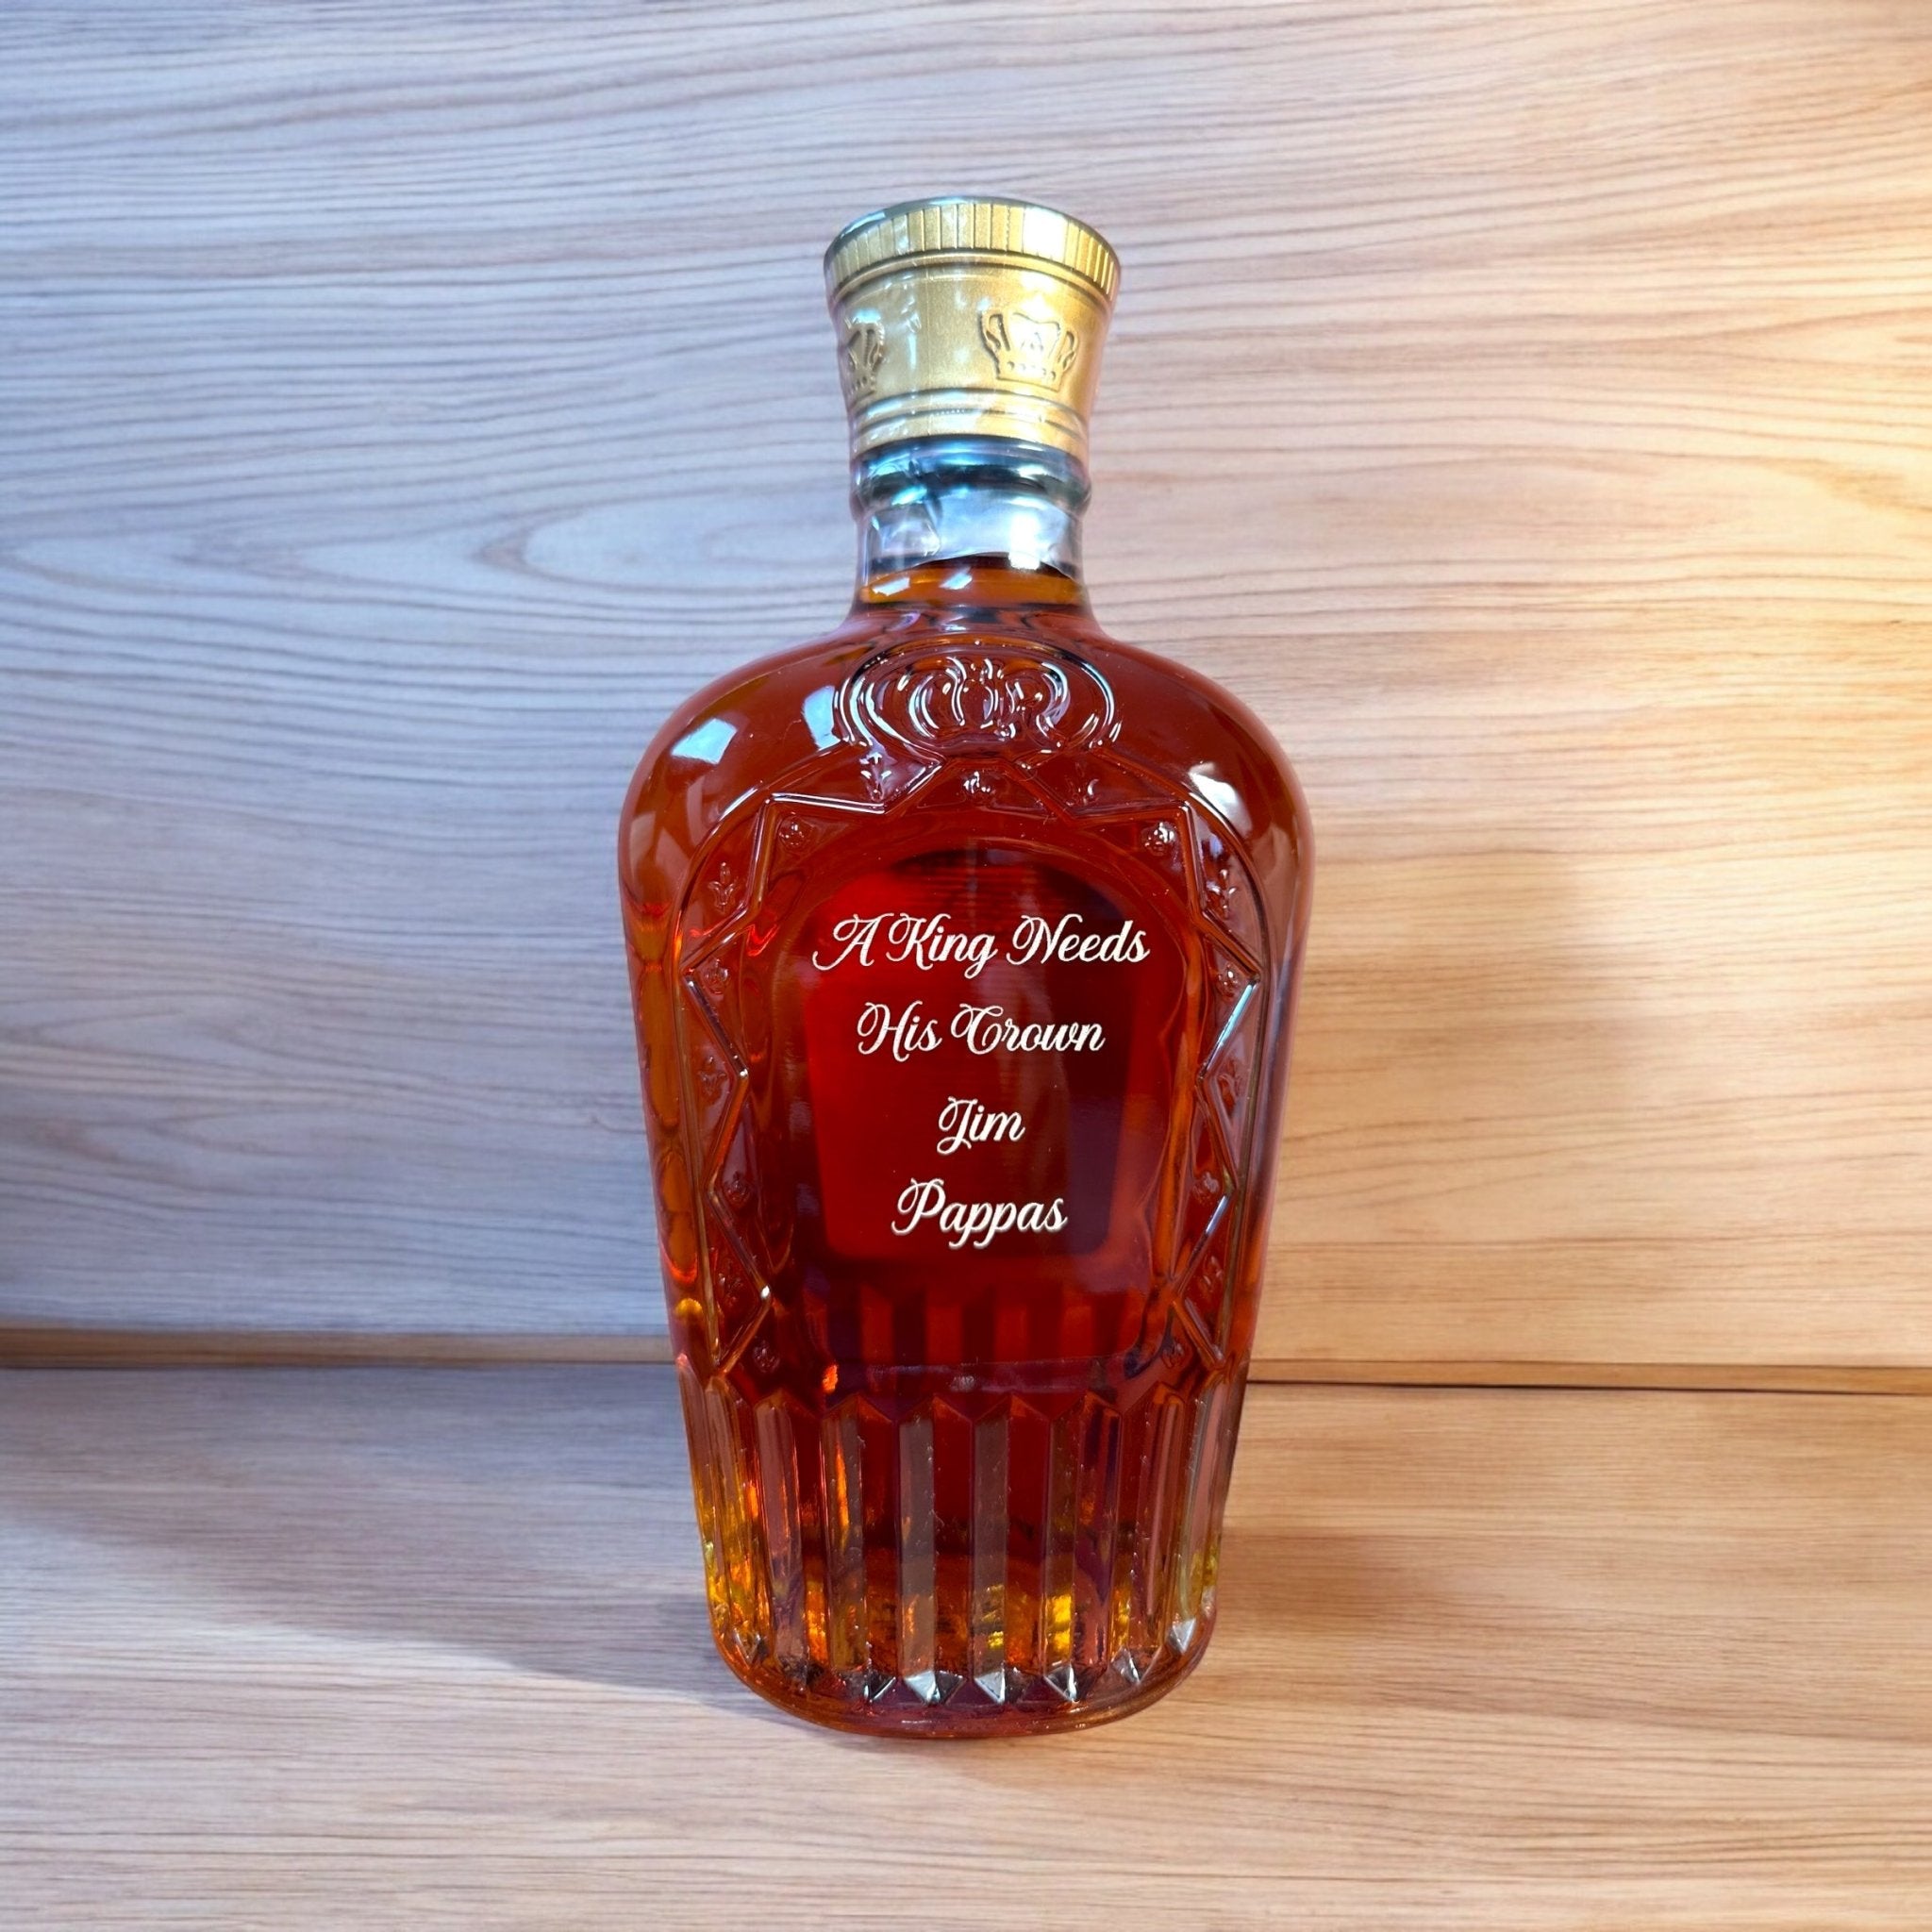 Crown Royal Blackberry Flavored Canadian Whiskey - Bottle Engraving